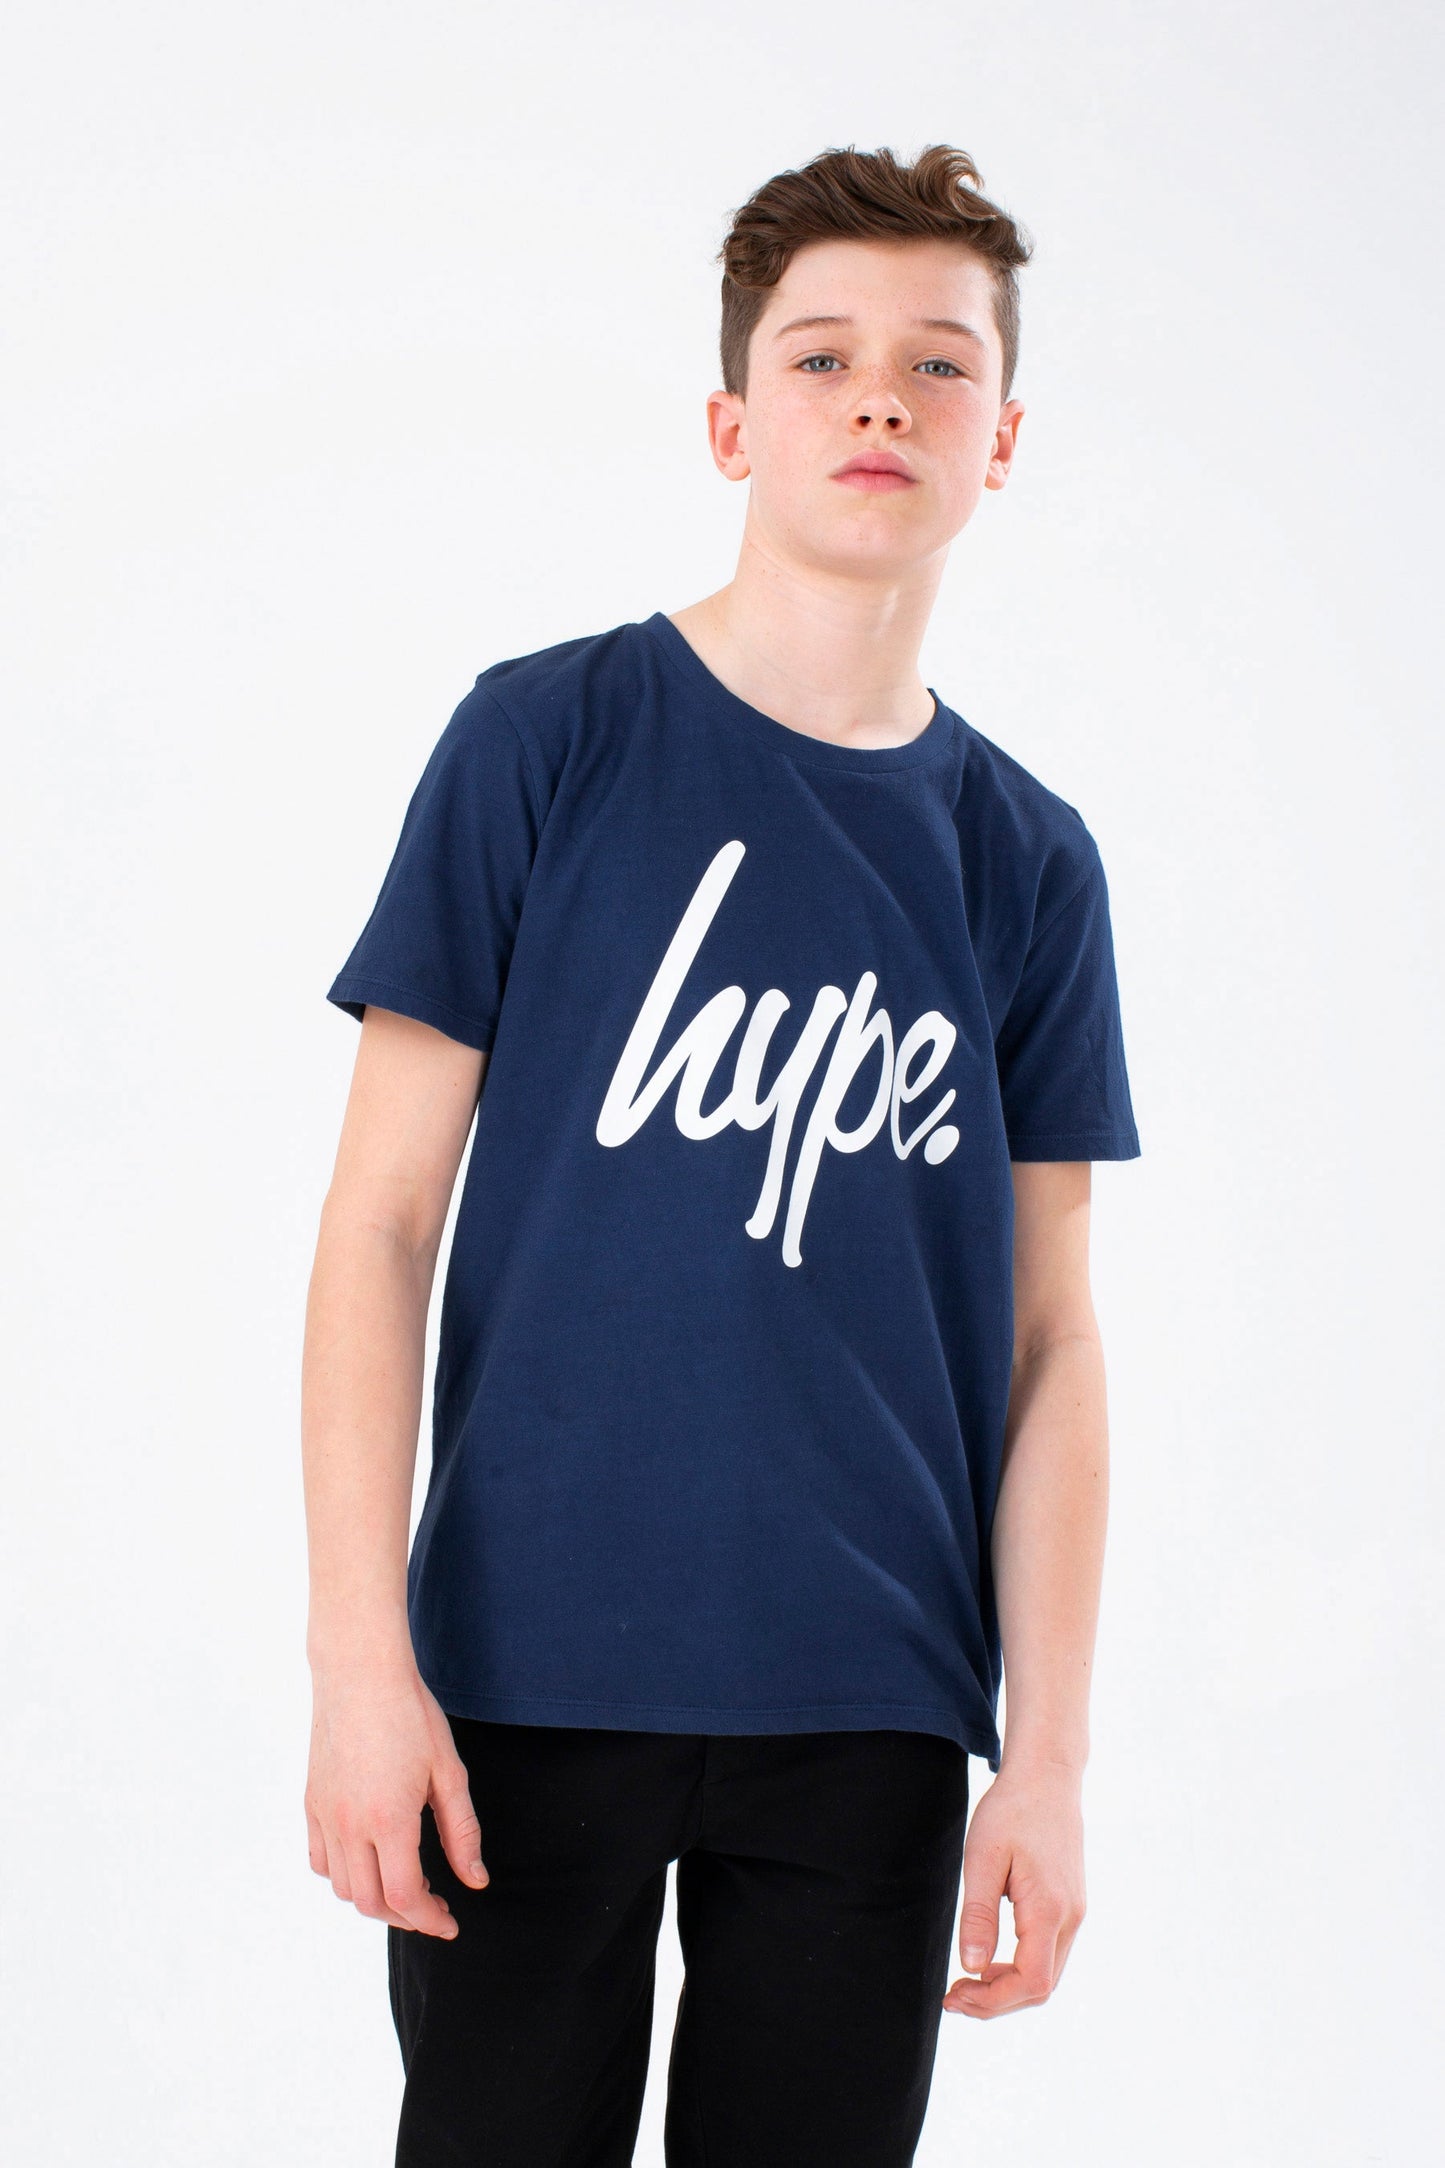 HYPE BOYS NAVY TEAL BLUE 3 PACK OF T-SHIRT